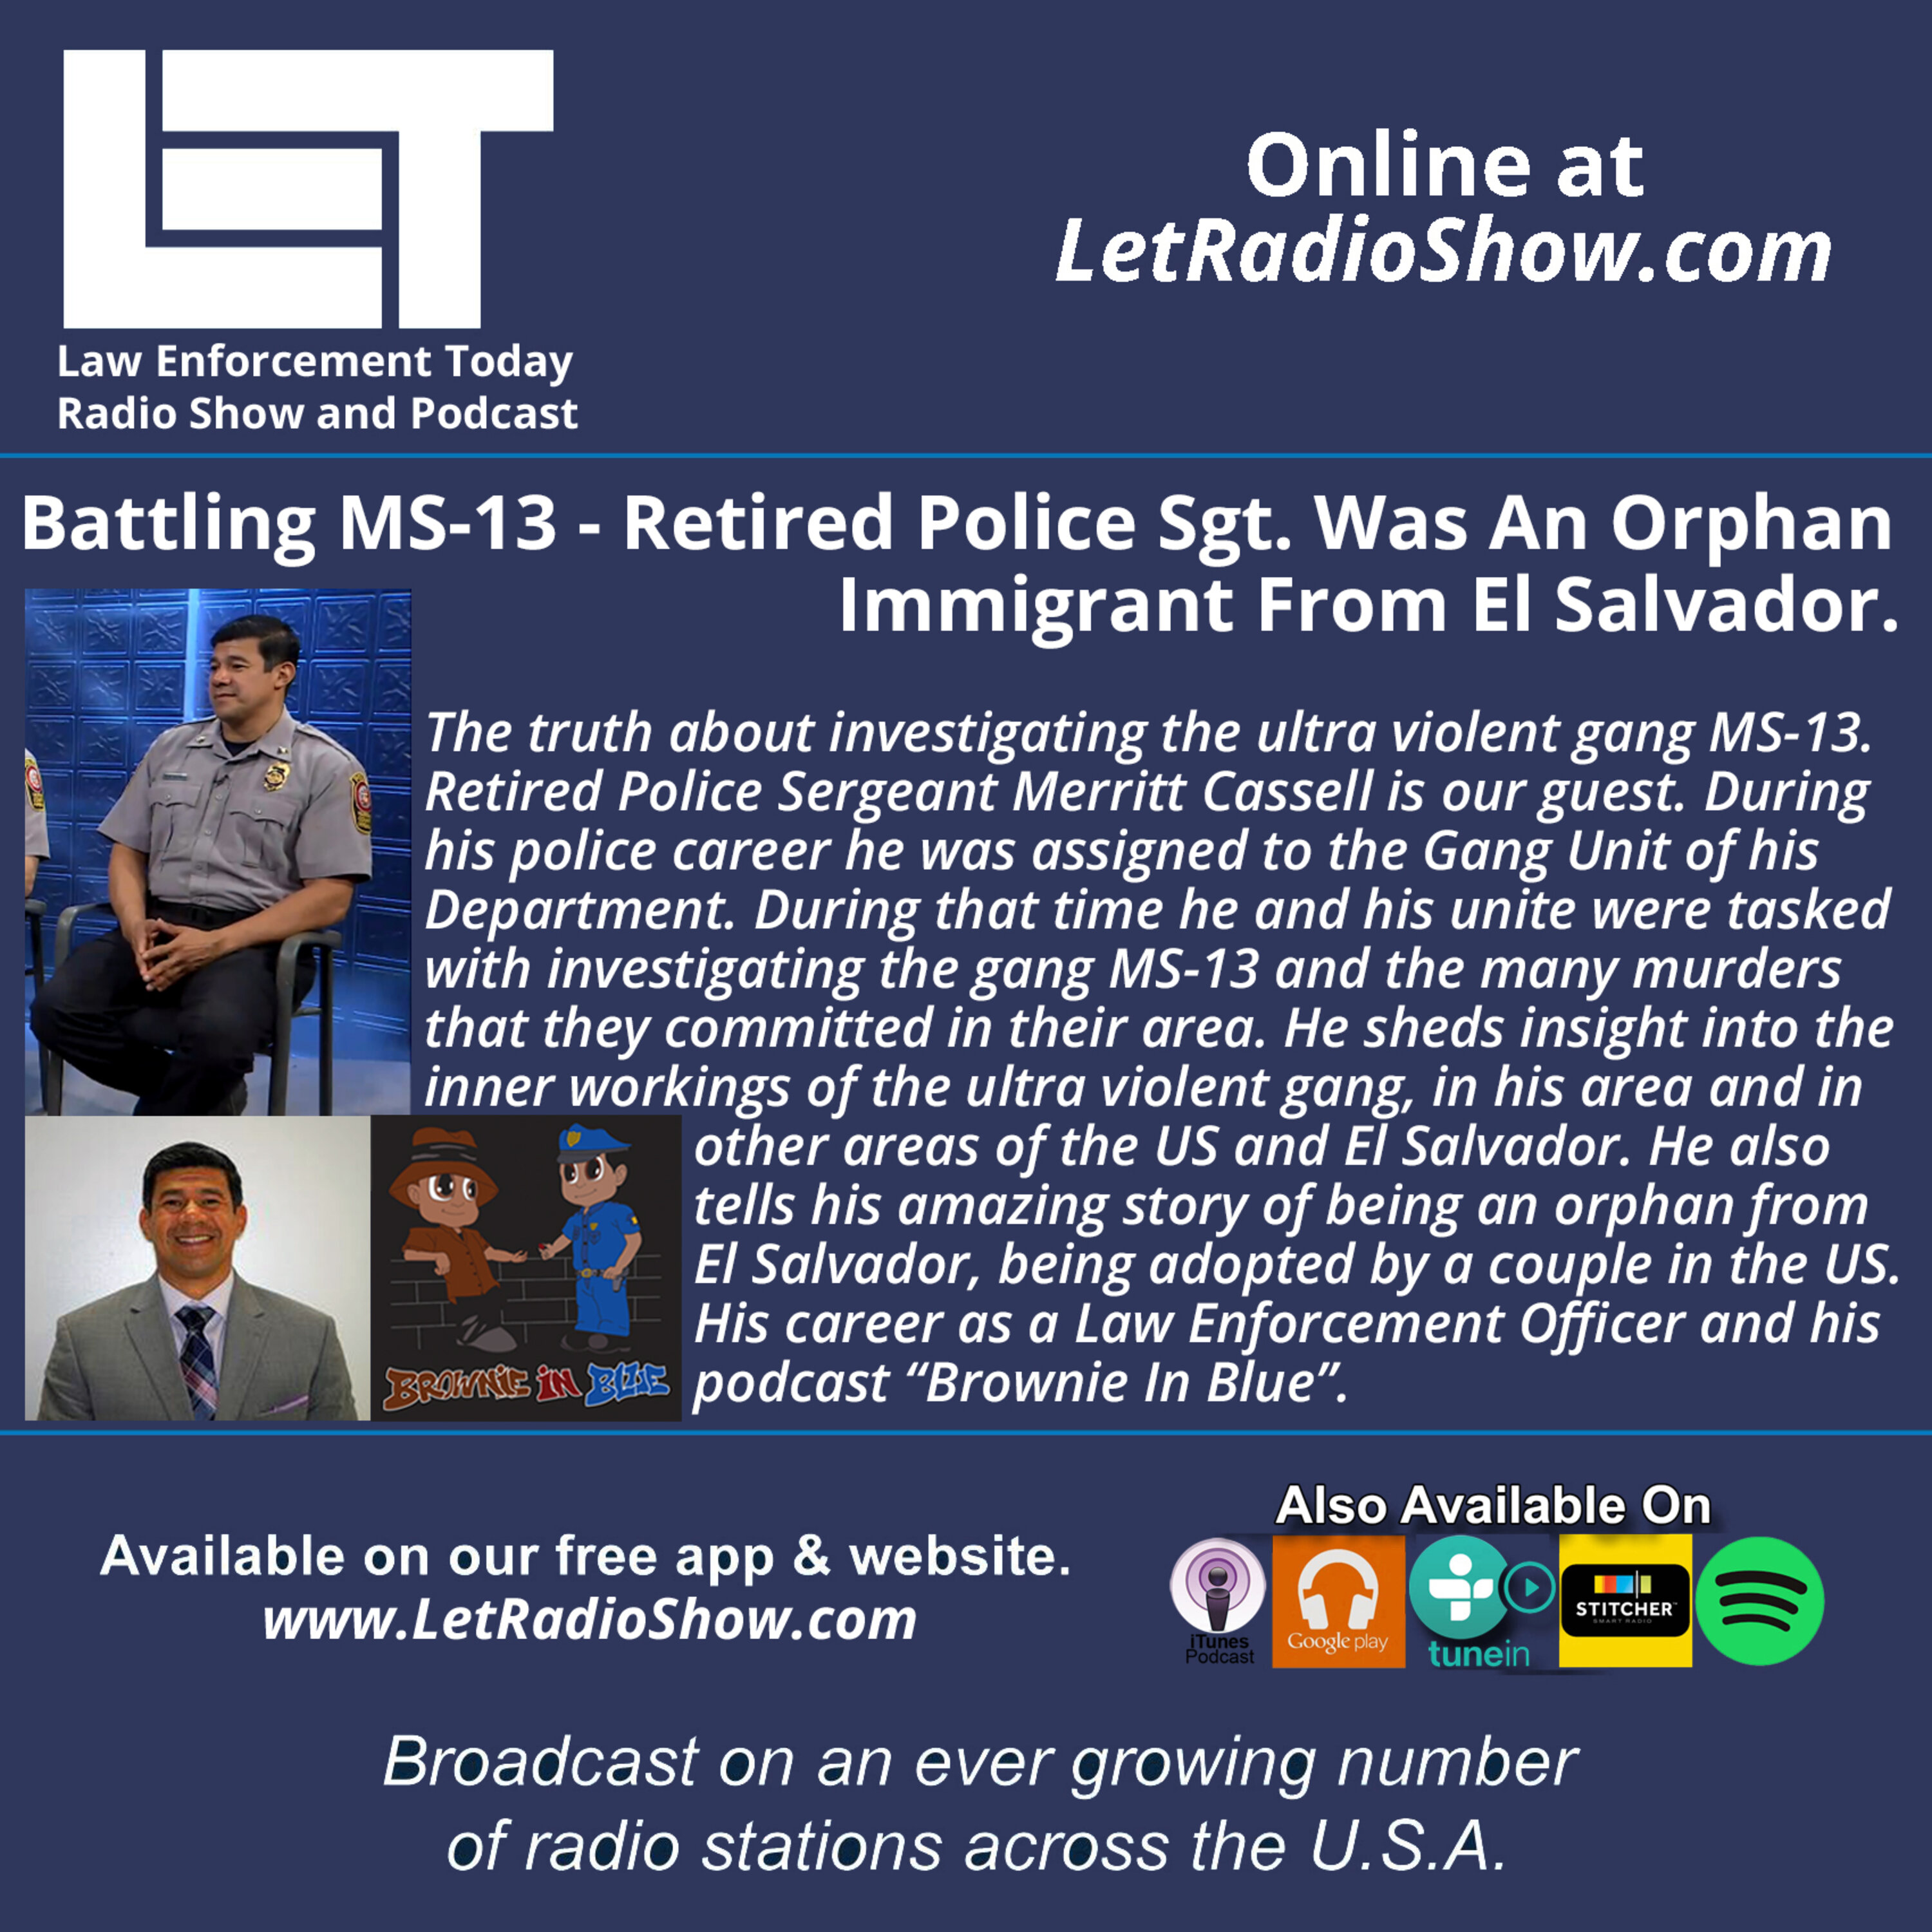 Episode image for S5E25: Battling MS-13 - Retired Police Sgt. Was an Orphan Immigrant from El Salvador.